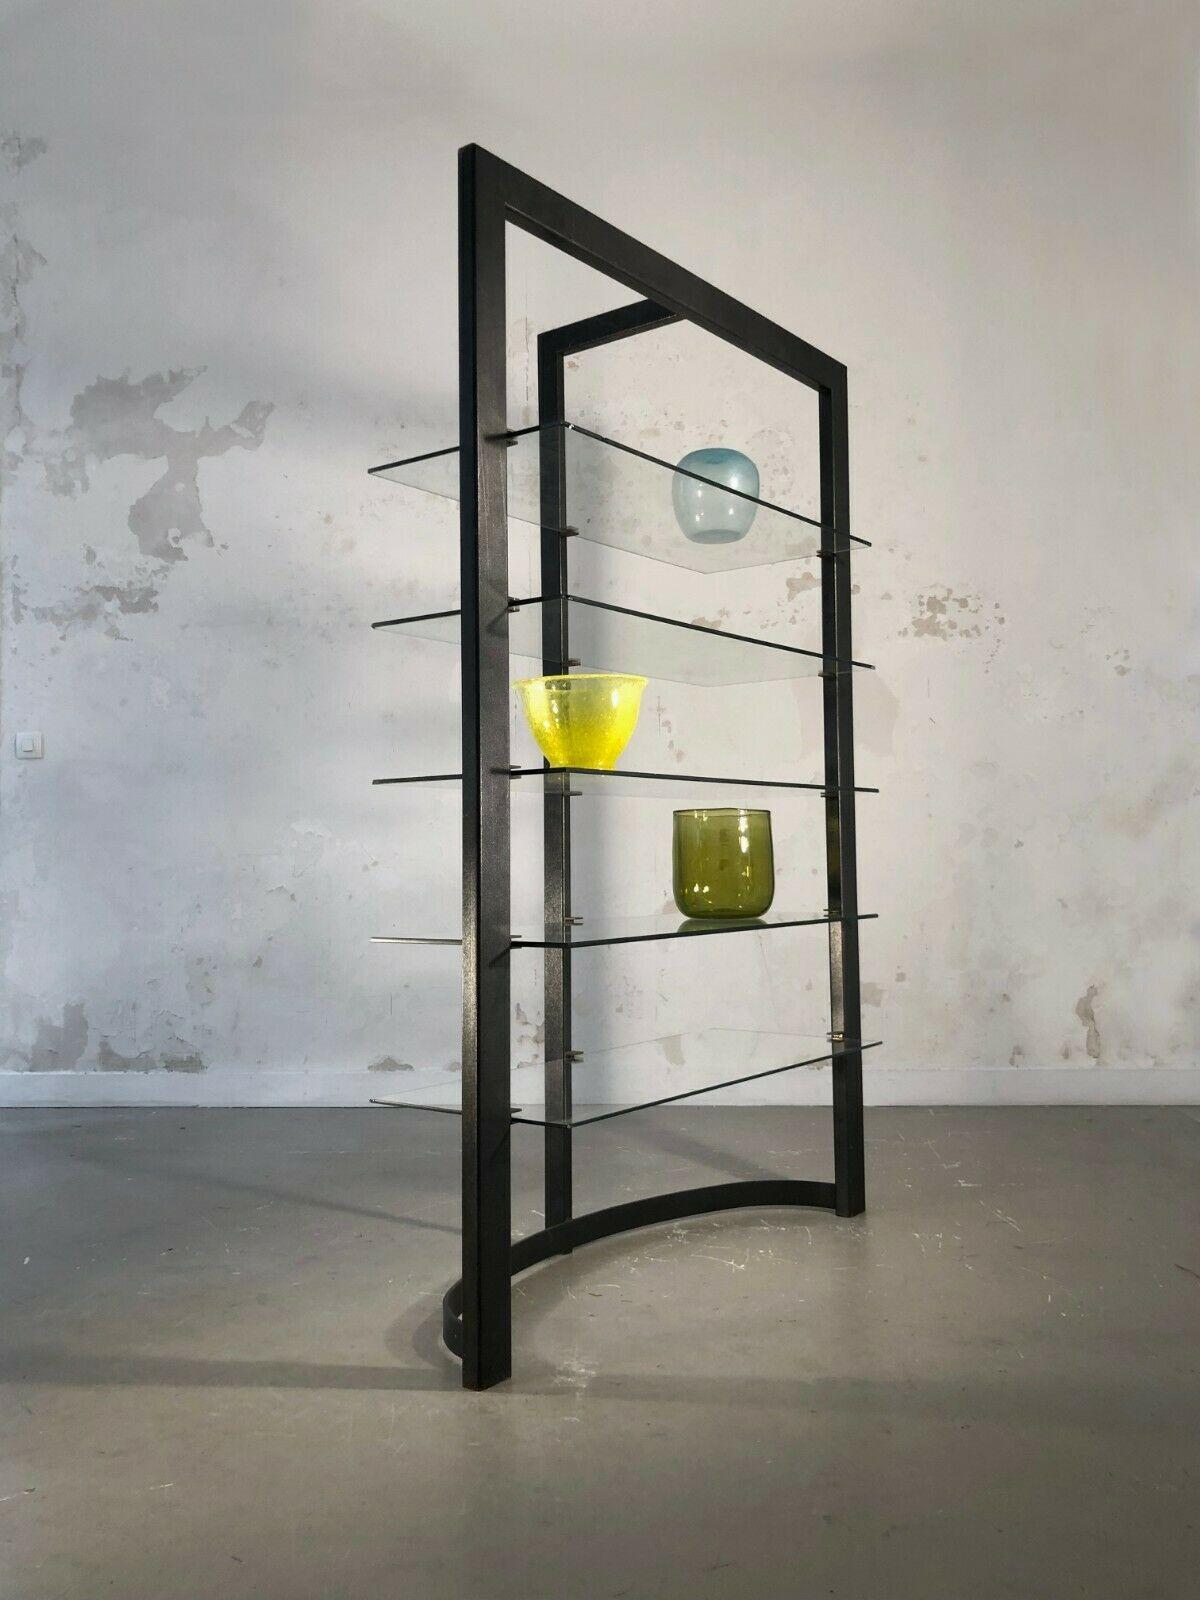 A radical shelving system or bookcase, Post-Modern, Constructivist, Memphis, Bauhaus, geometric asymmetric structure in steel lacquered in anthracite, with 5 shelves in glass suspended with brass or bronze square pieces, to be attributed, France,